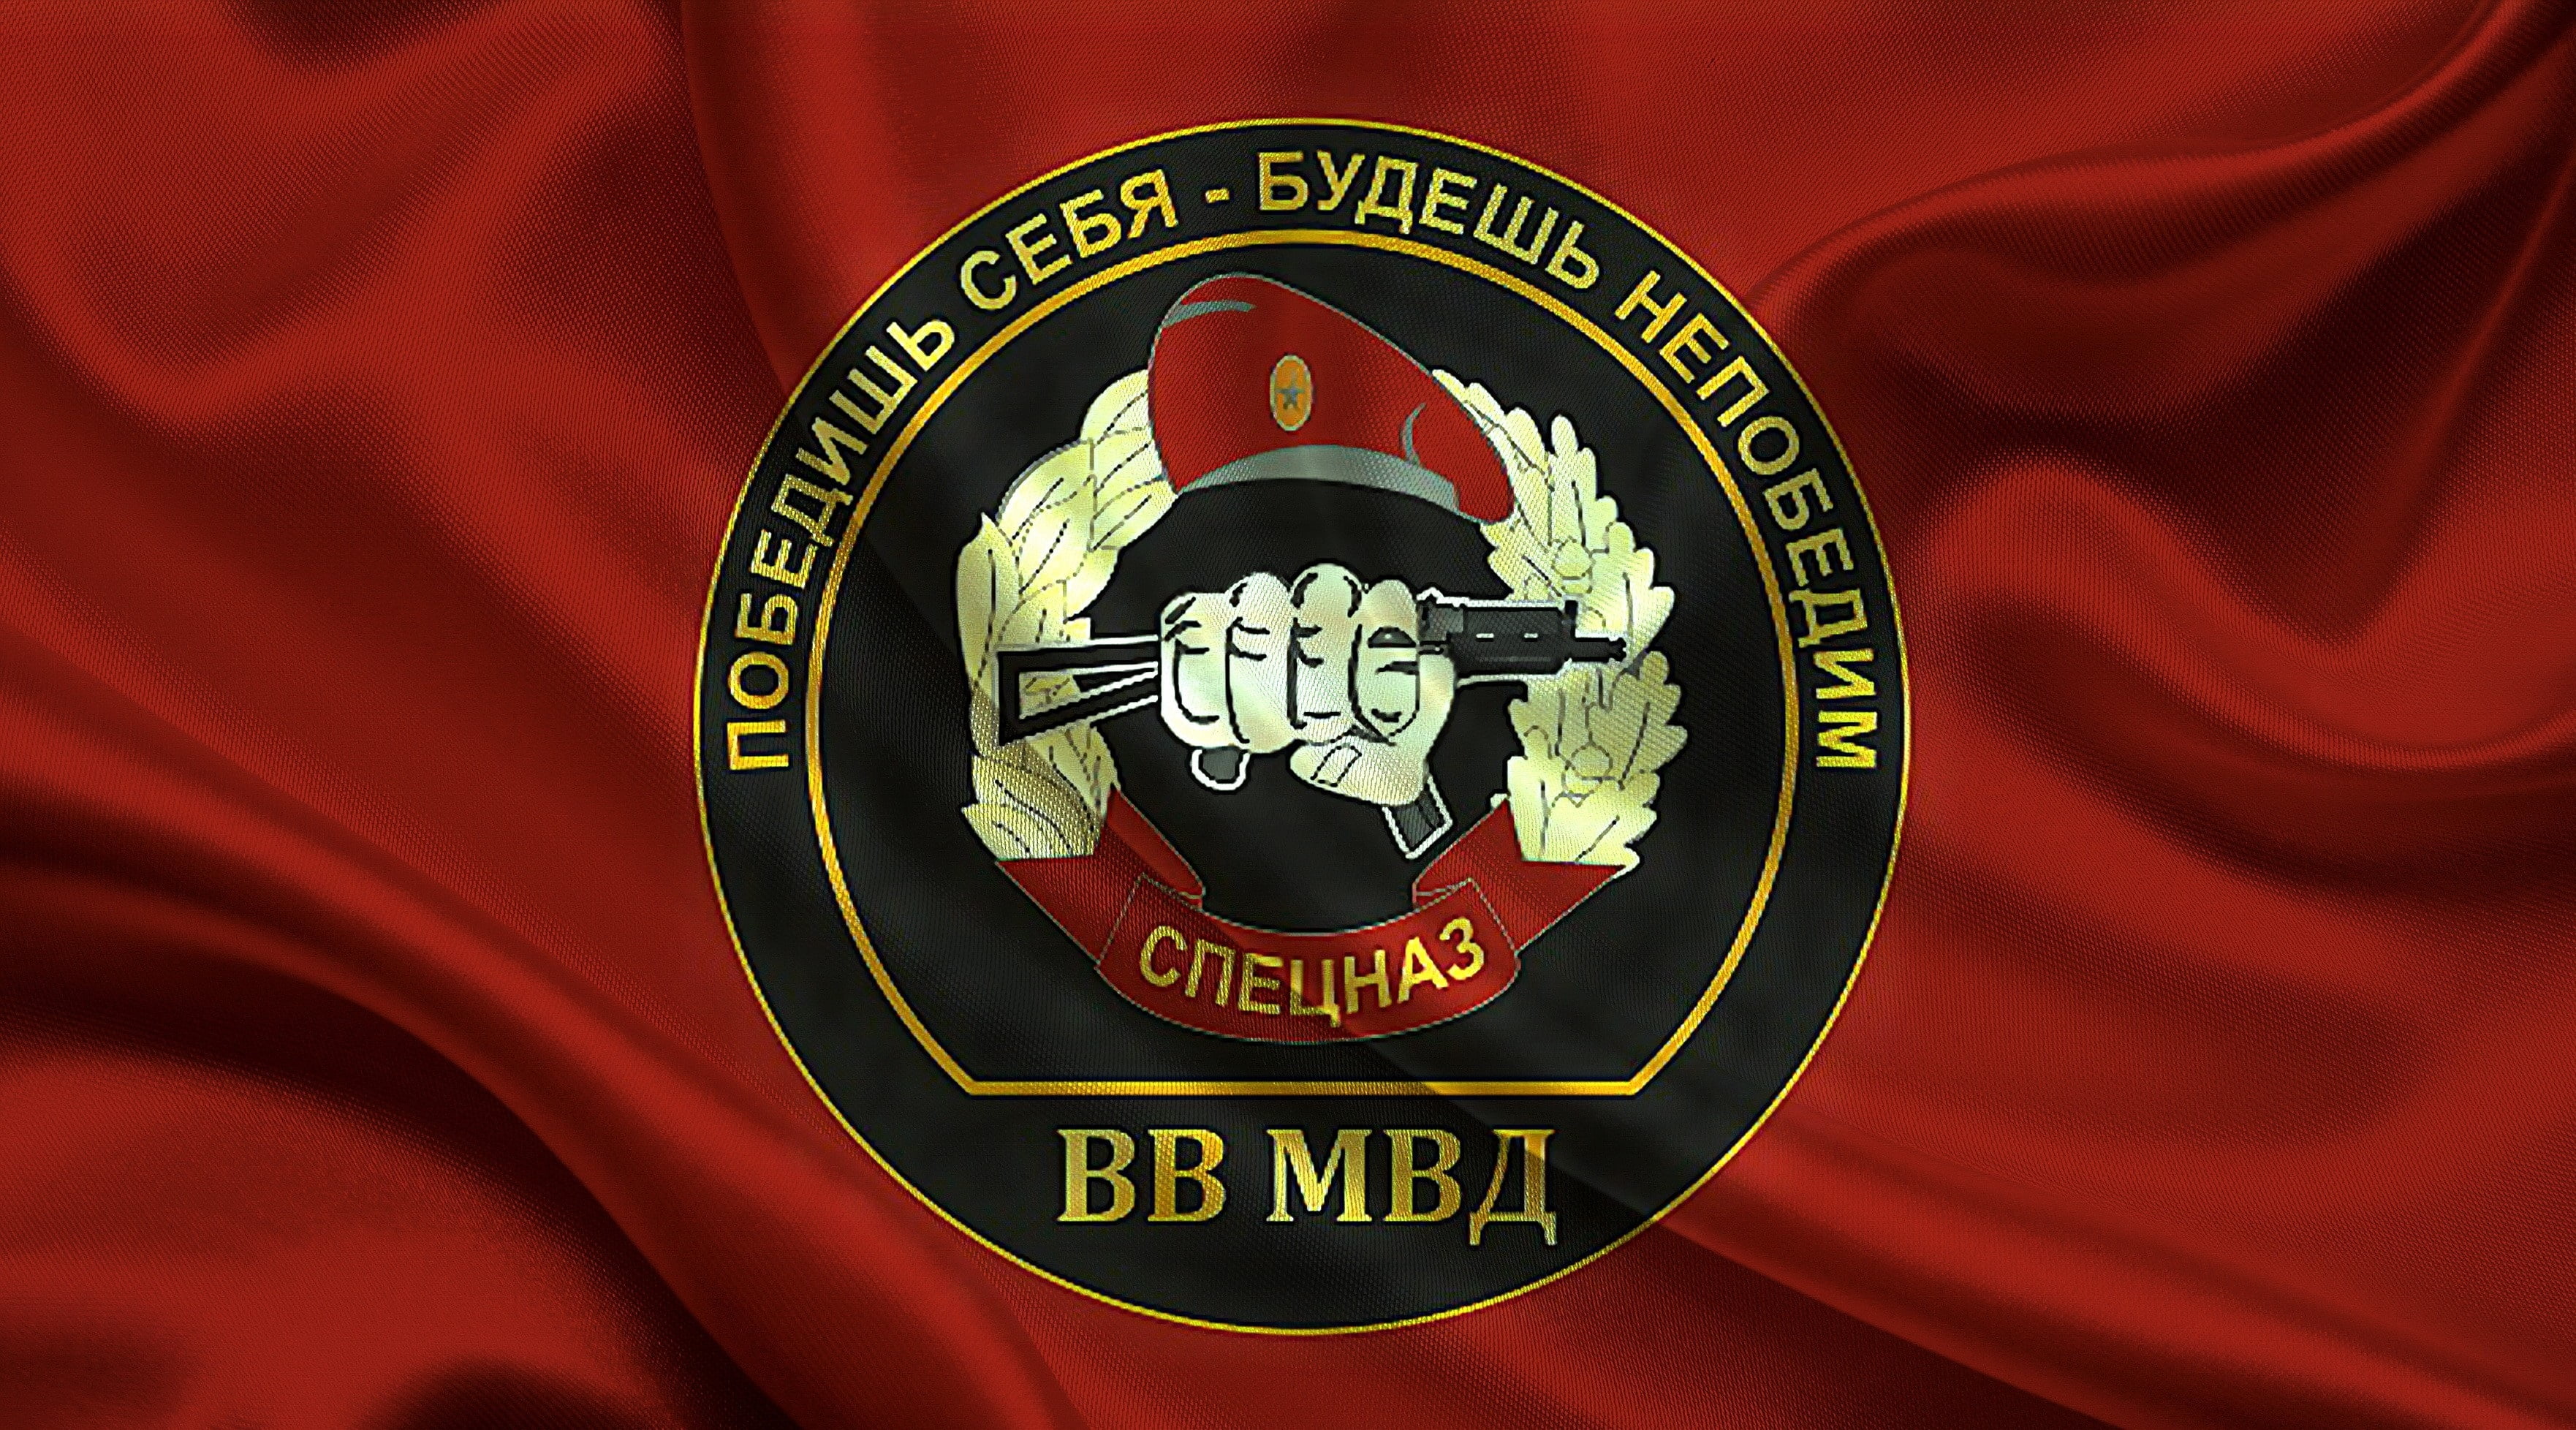 black, red, and yellow logo, symbol, motto, Special forces, MIA